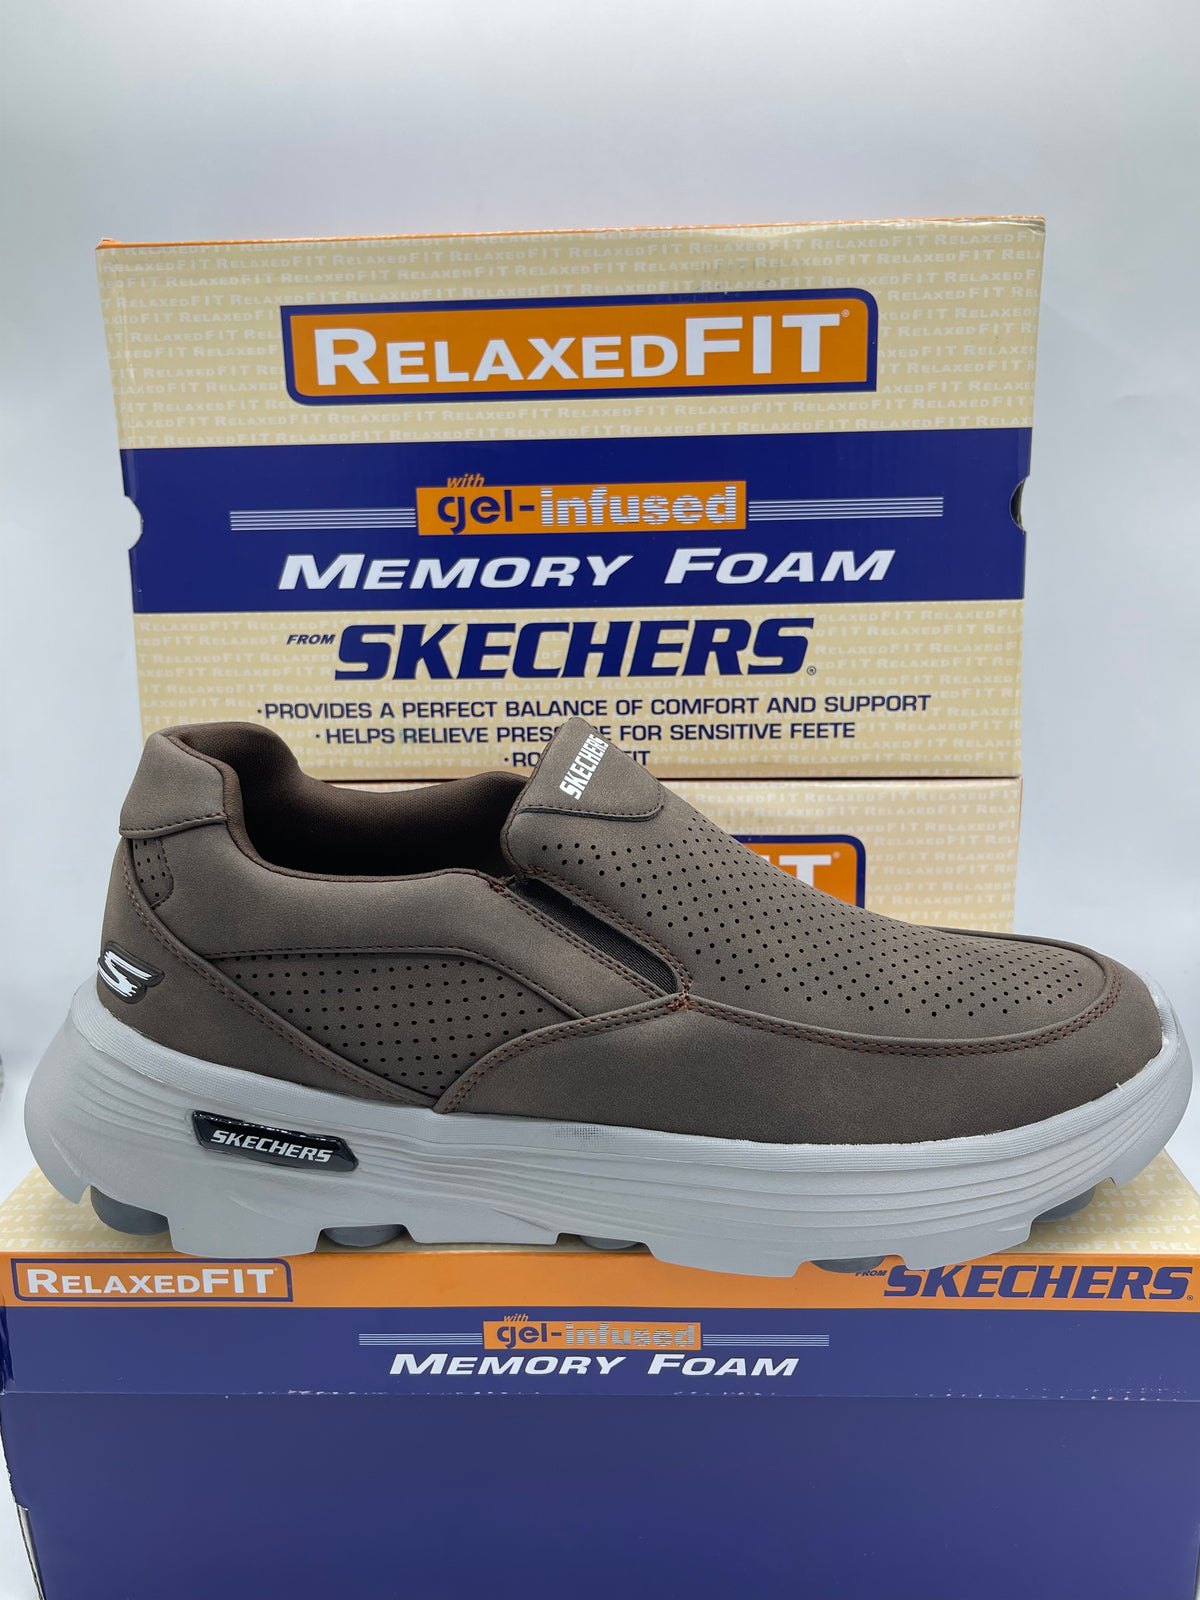 Skechers stock lots 👈 all sizes available 40 se 45